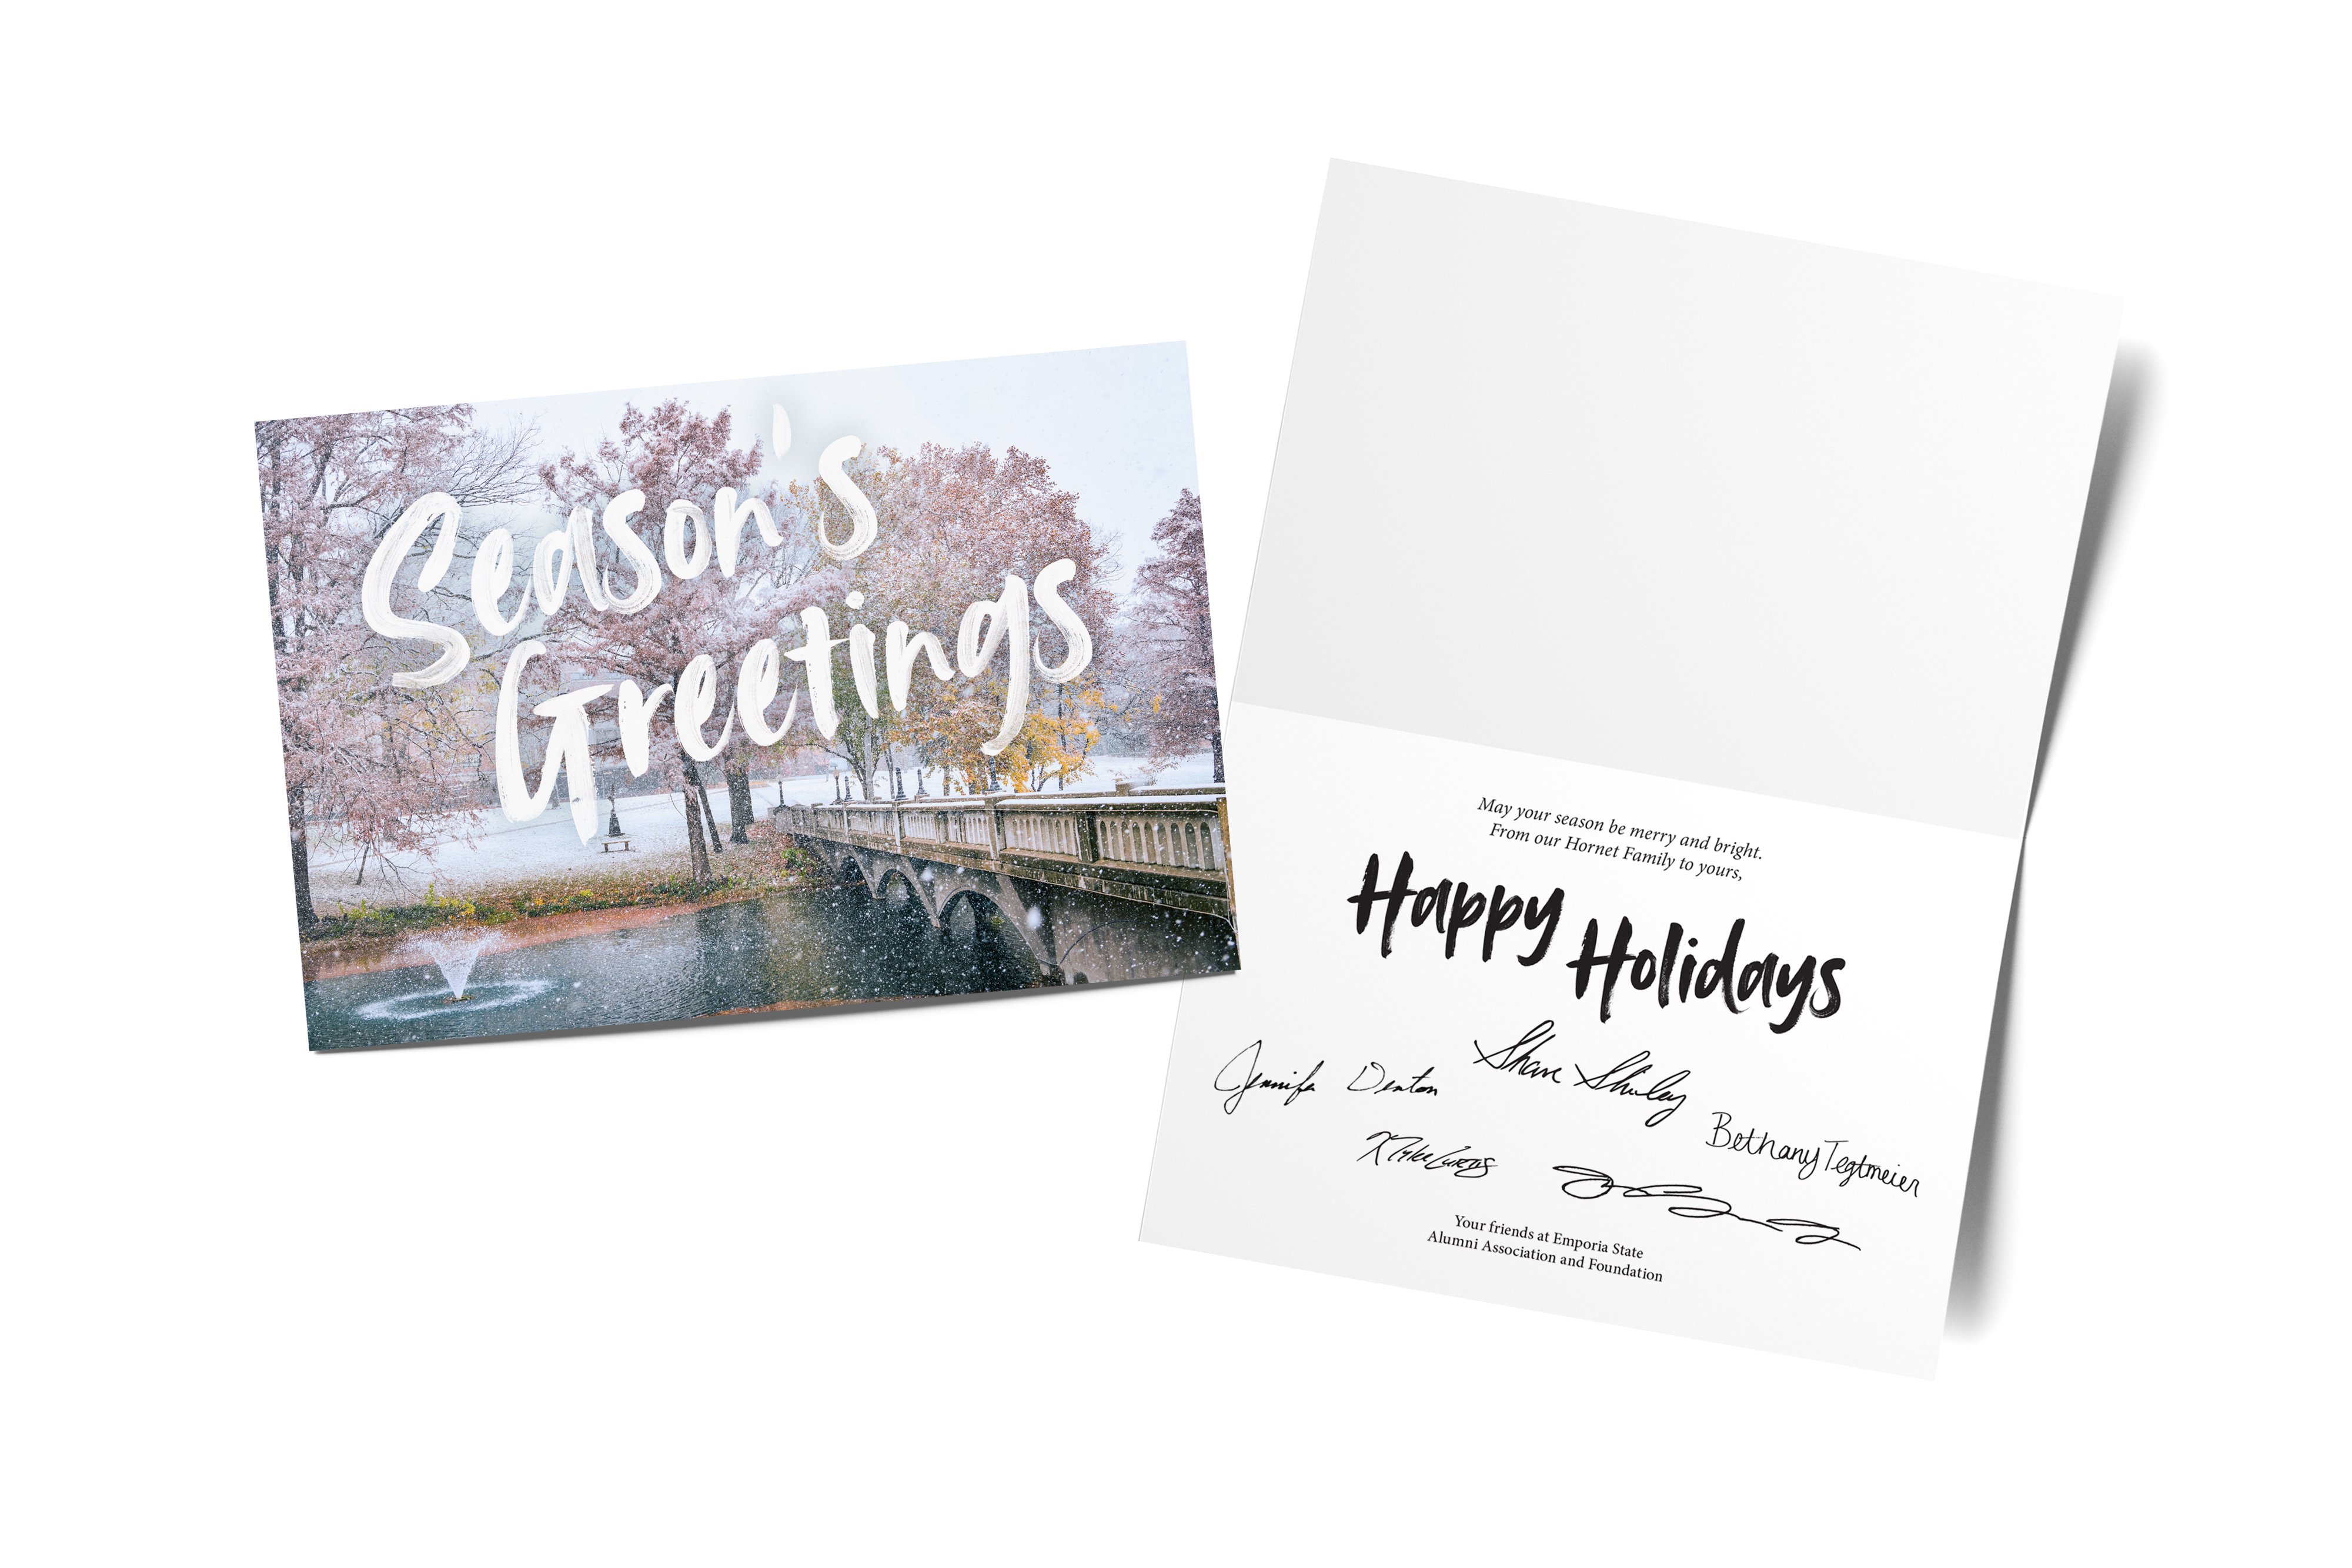 Holiday Card example from University Copy Center